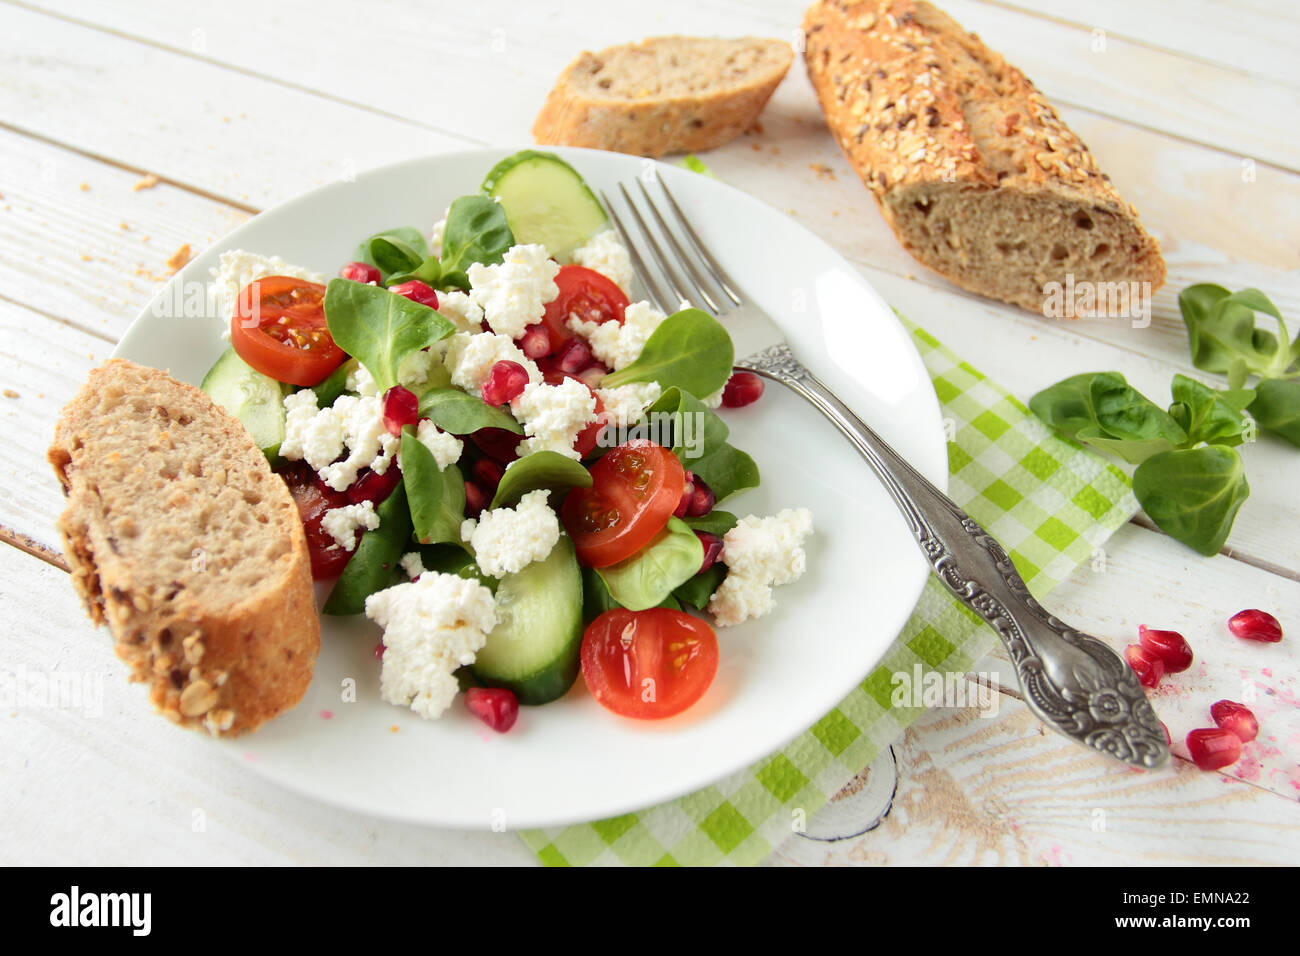 Healthy salad with fresh lettuce, white cheese and pomegranate fruit Stock Photo